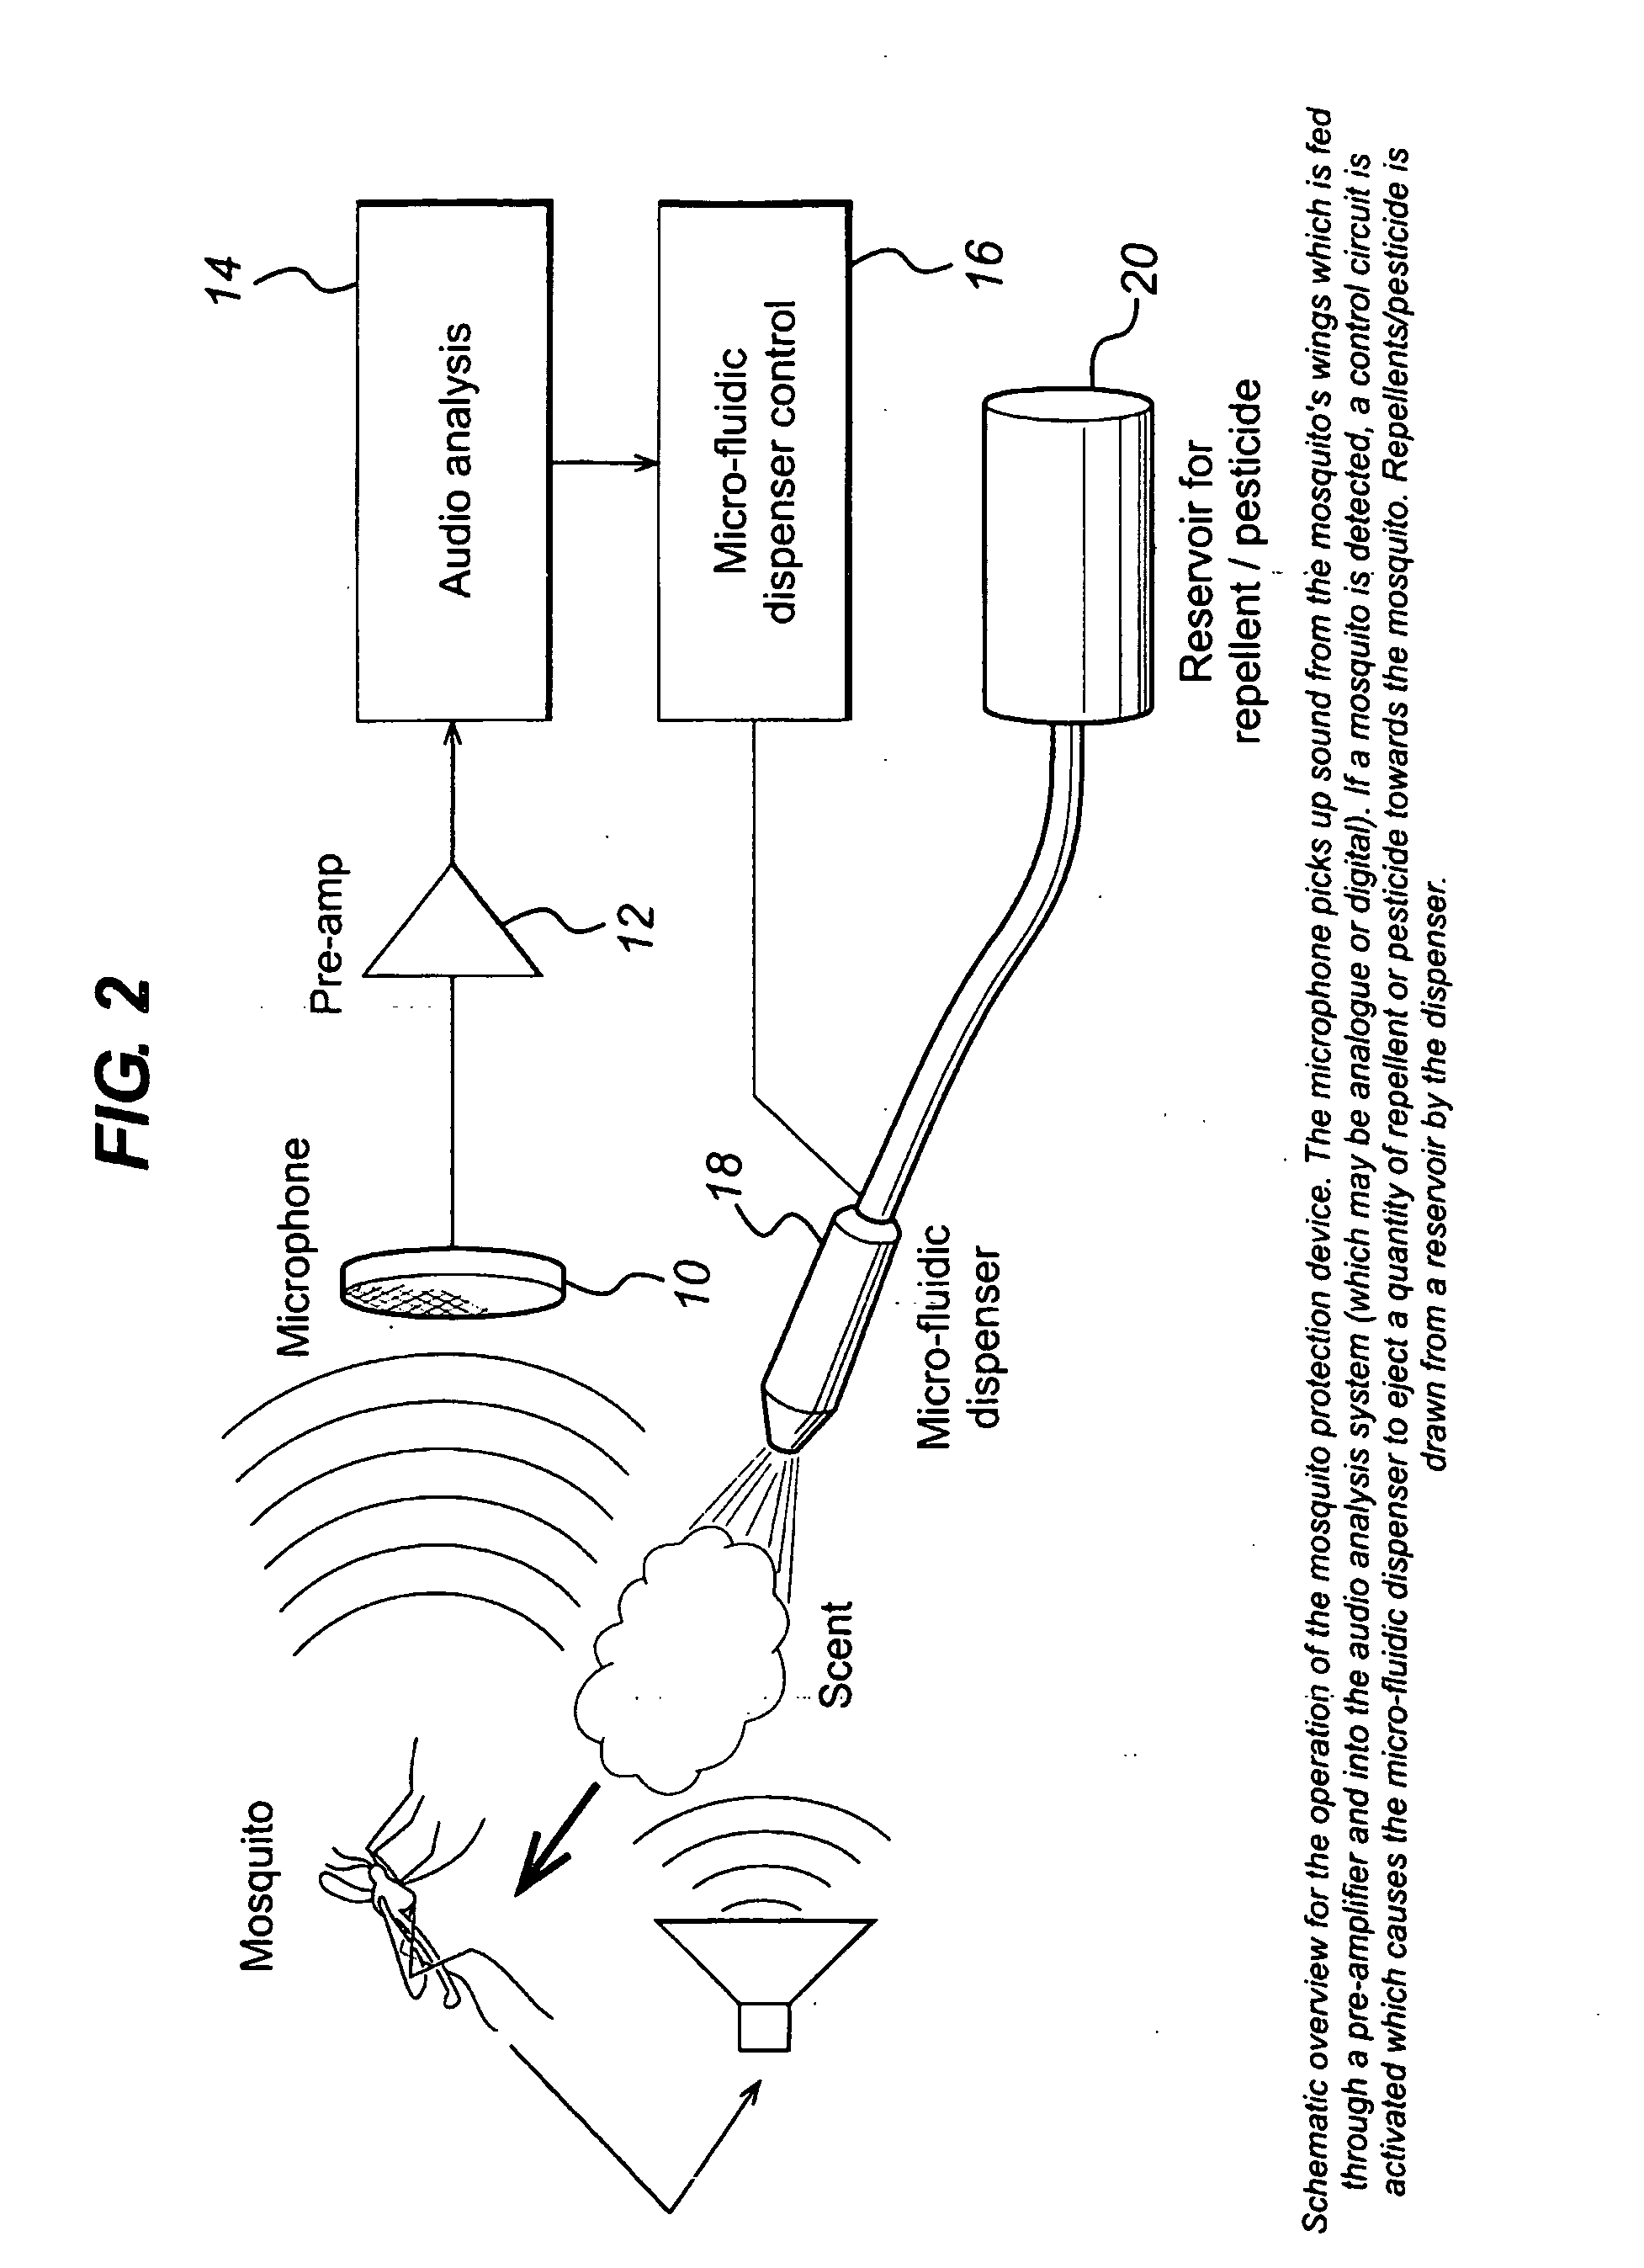 System and method for dispensing fluid in response to a sensed property